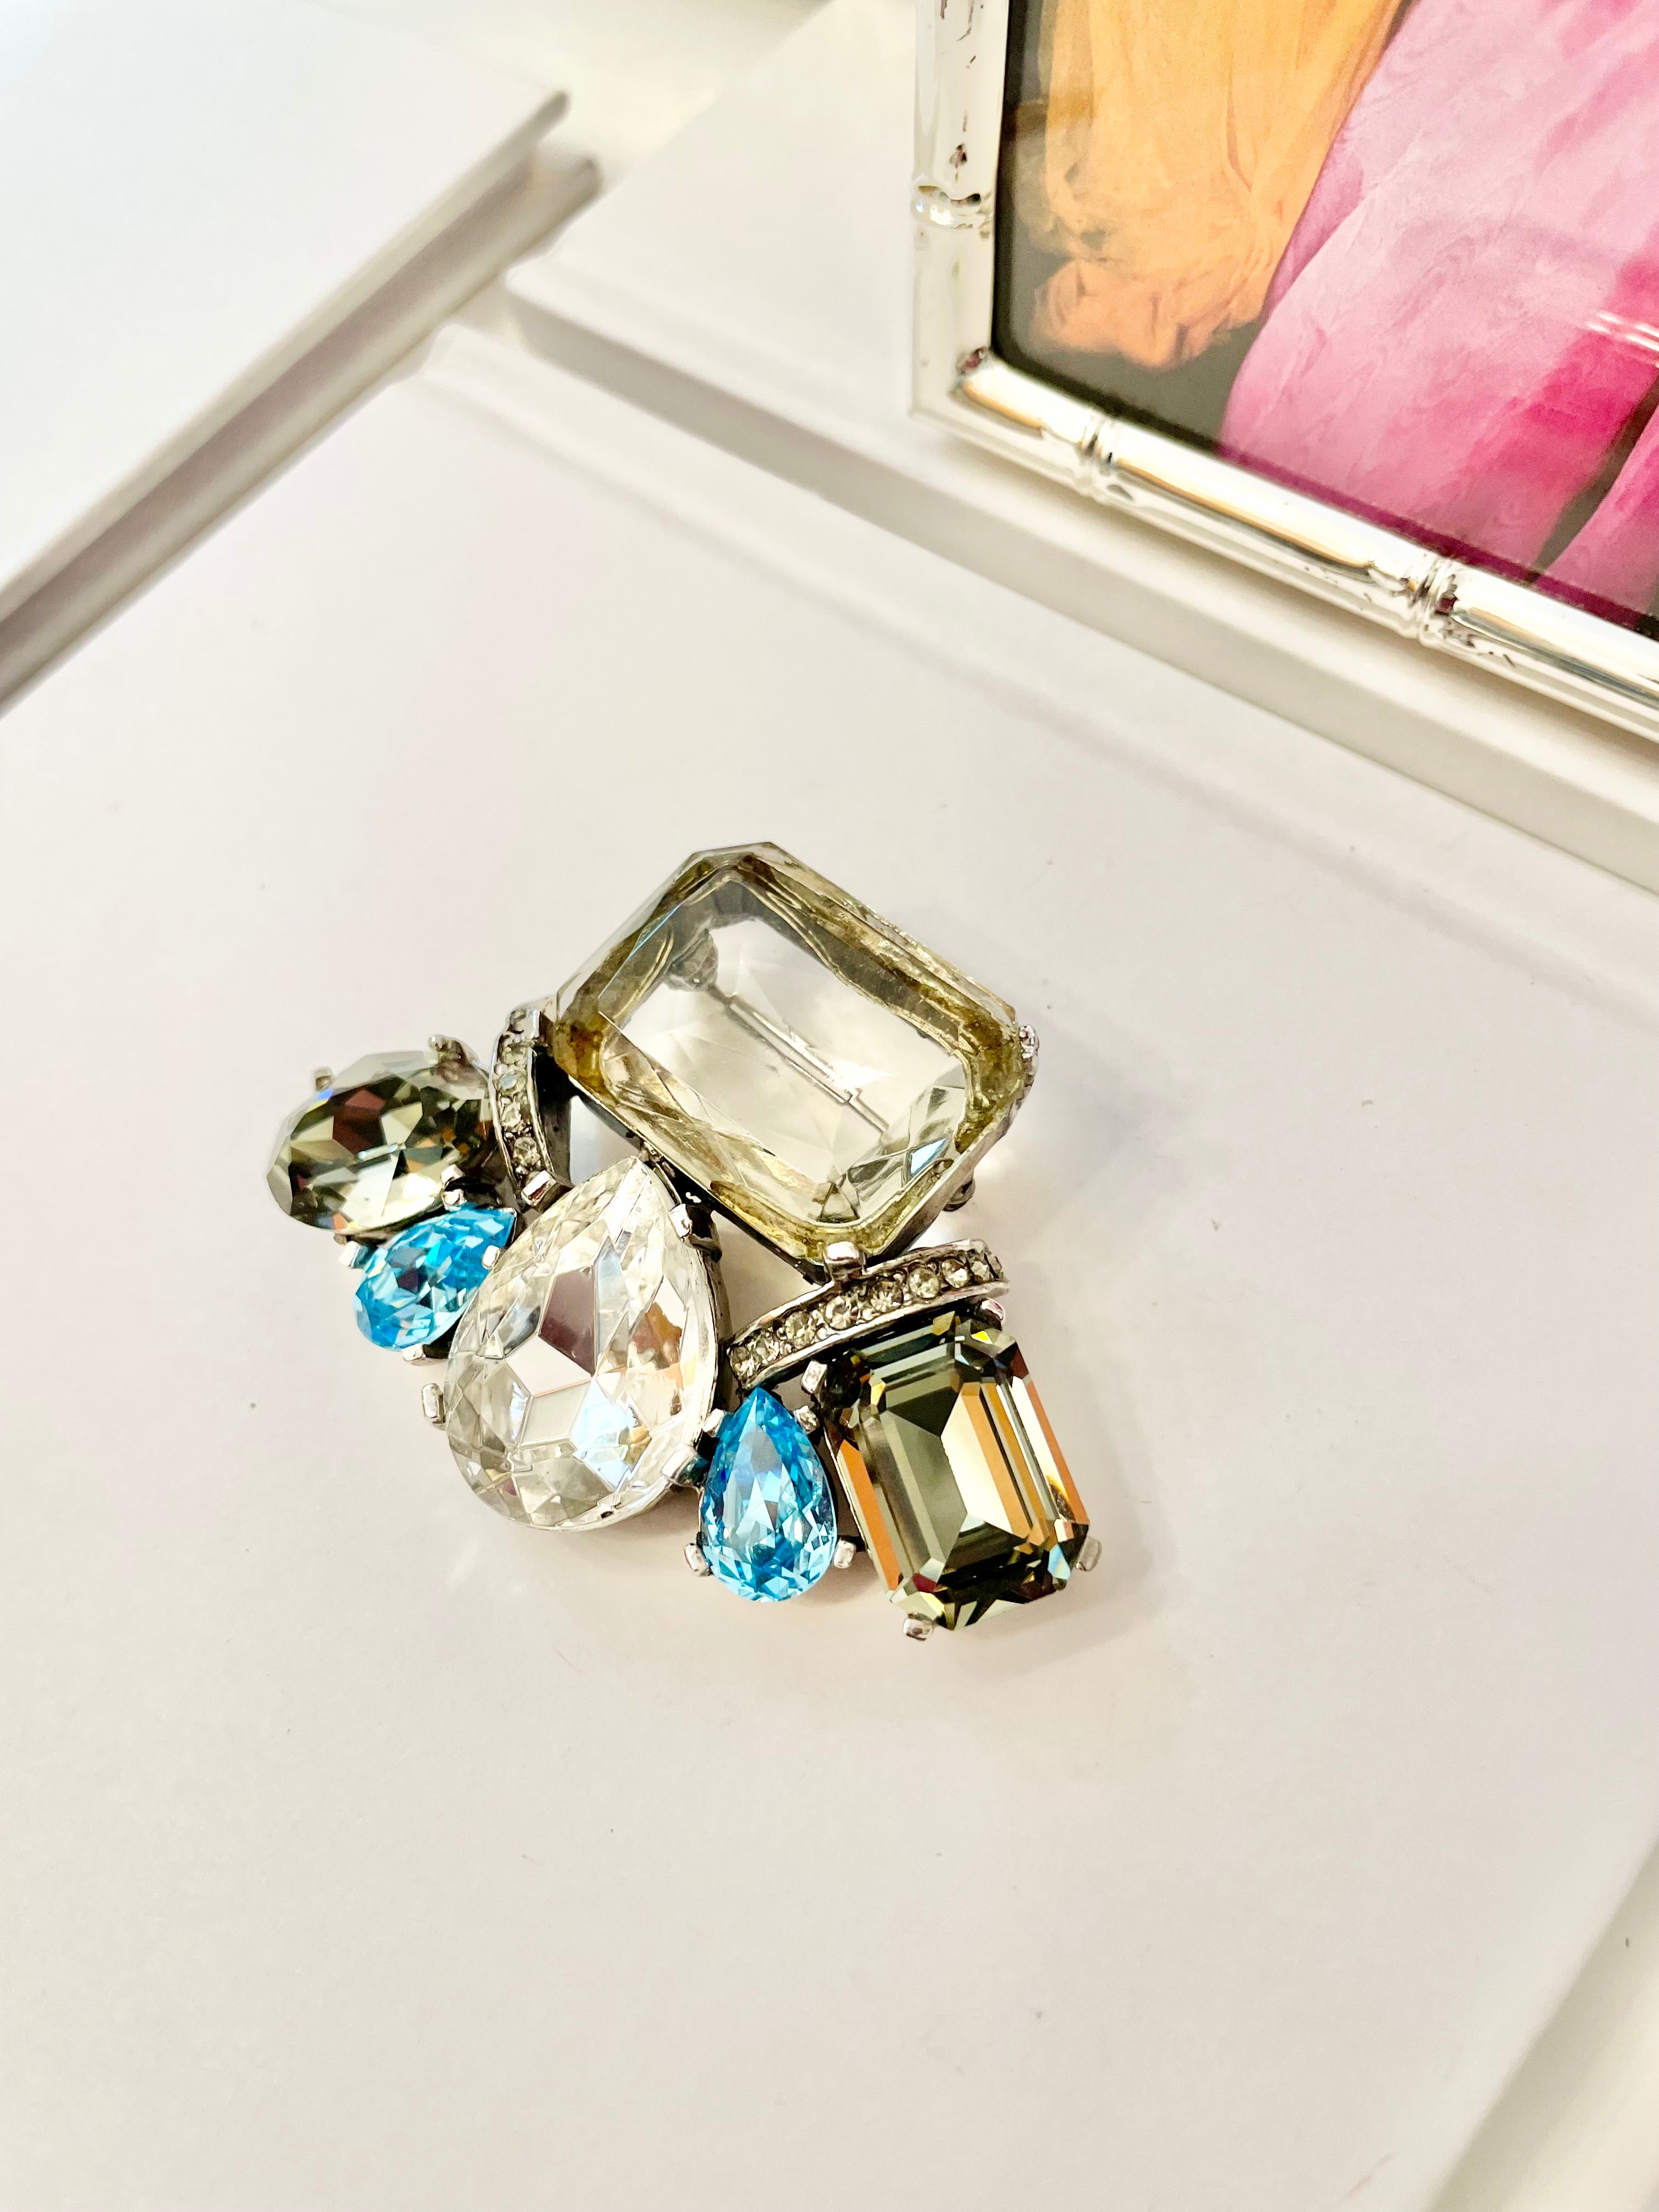 The Socialite and her love of large gemstone brooches! This one is extraordinary...